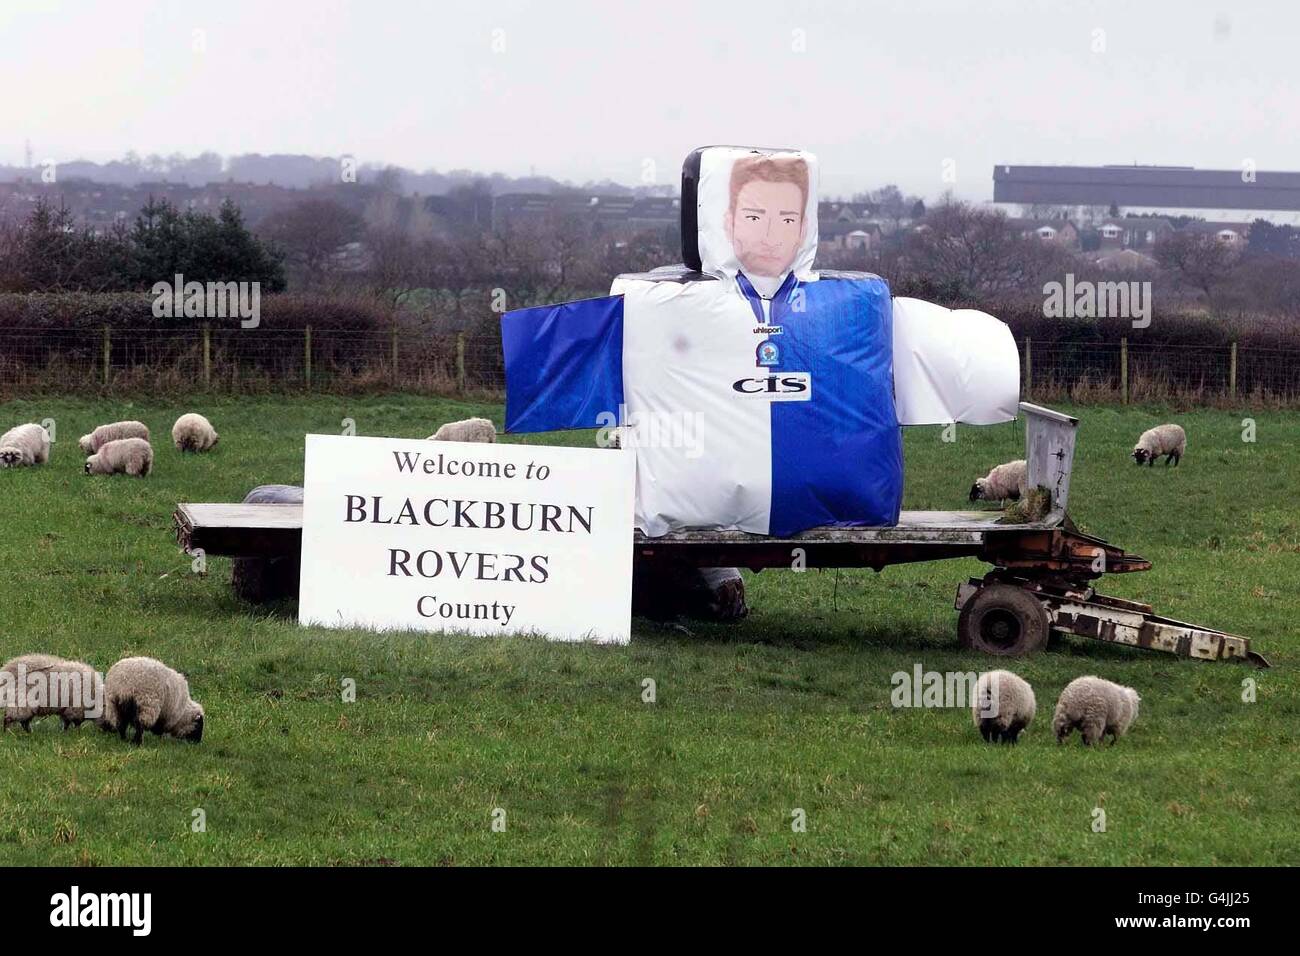 A football fanatic farmer has put up a giant model of former Blackburn Rover striker and captain Chris Sutton in his field by the A61 near Bolton. Sutton has been recalled to the England soccer squad. Stock Photo